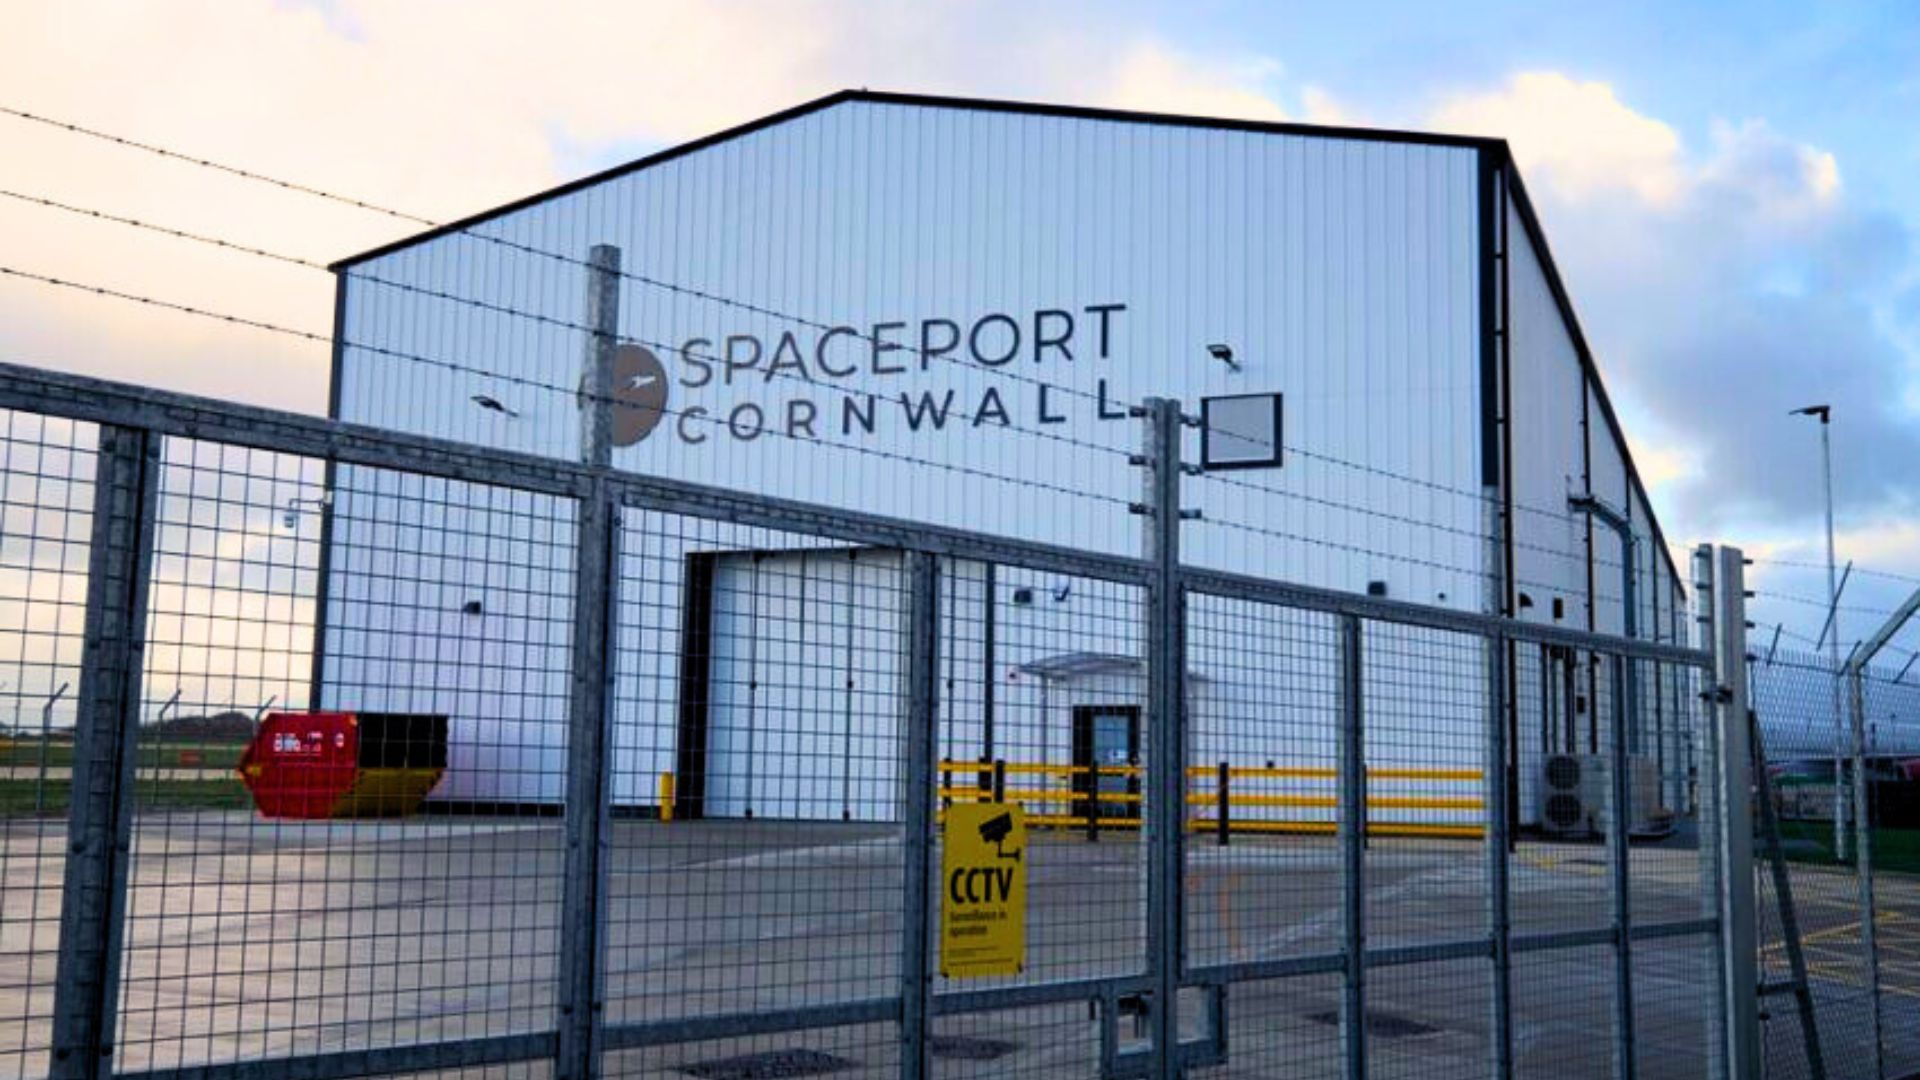 Spaceport Cornwall: A follow up